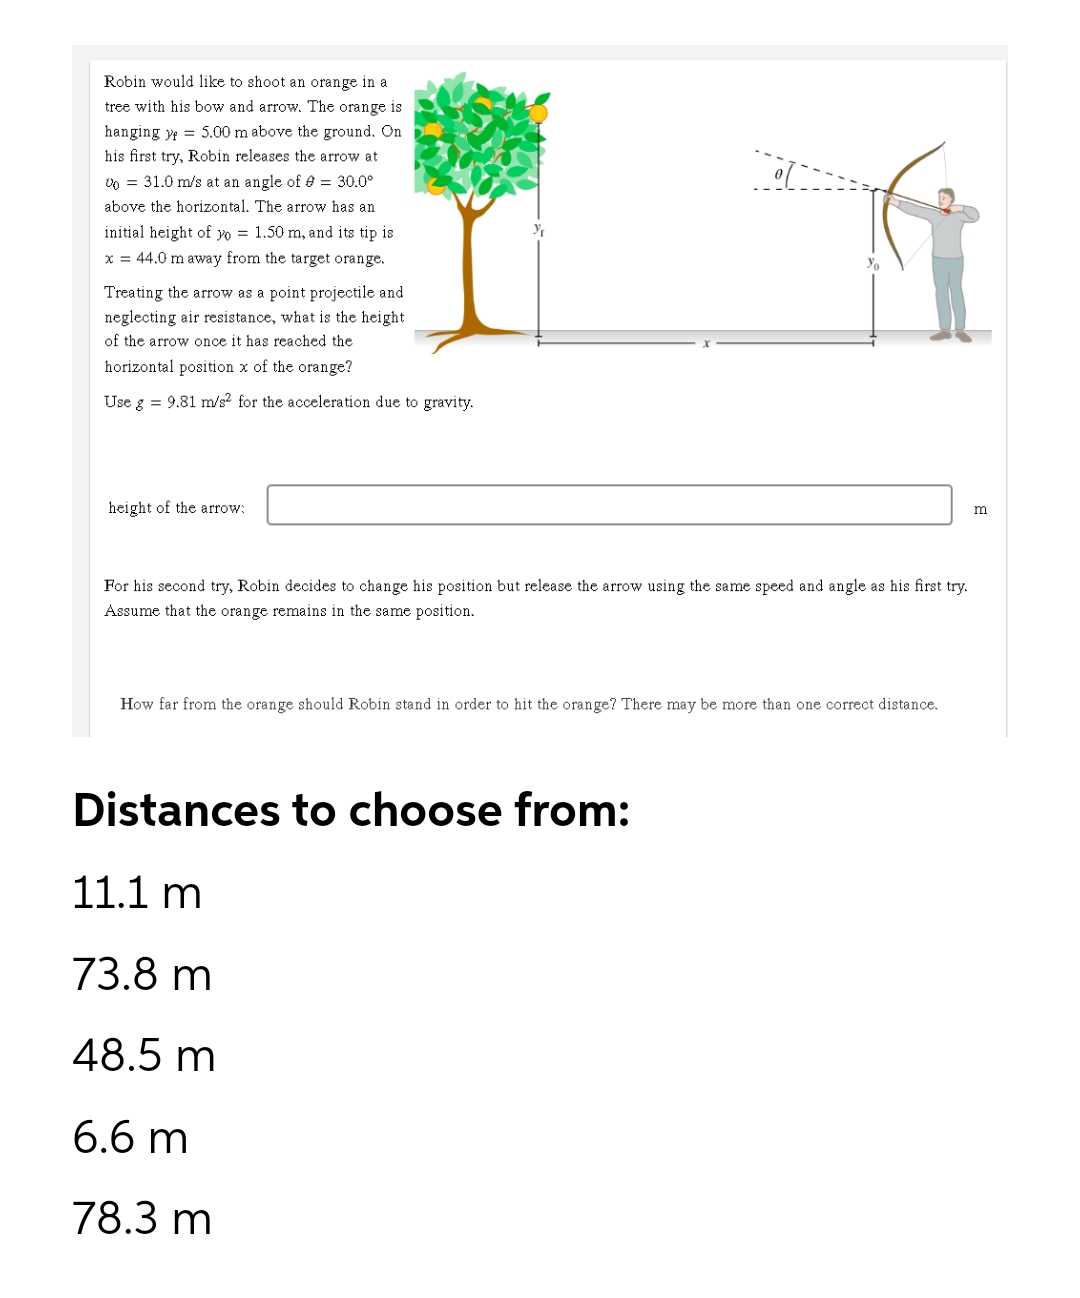 Robin would like to shoot an orange in a
tree with his bow and arrow. The orange is
hanging y 5.00 m above the ground. On
his first try, Robin releases the arrow at
U = 31.0 m/s at an angle of 0 = 30.0⁰
above the horizontal. The arrow has an
initial height of yo = 1.50 m, and its tip is
x = 44.0 m away from the target orange.
Treating the arrow as a point projectile and
neglecting air resistance, what is the height
of the arrow once it has reached the
horizontal position x of the orange?
Use g = 9.81 m/s² for the acceleration due to gravity.
m
height of the arrow:
For his second try, Robin decides to change his position but release the arrow using the same speed and angle as his first try.
Assume that the orange remains in the same position.
How far from the orange should Robin stand in order to hit the orange? There may be more than one correct distance.
Distances to choose from:
11.1 m
73.8 m
48.5 m
6.6 m
78.3 m